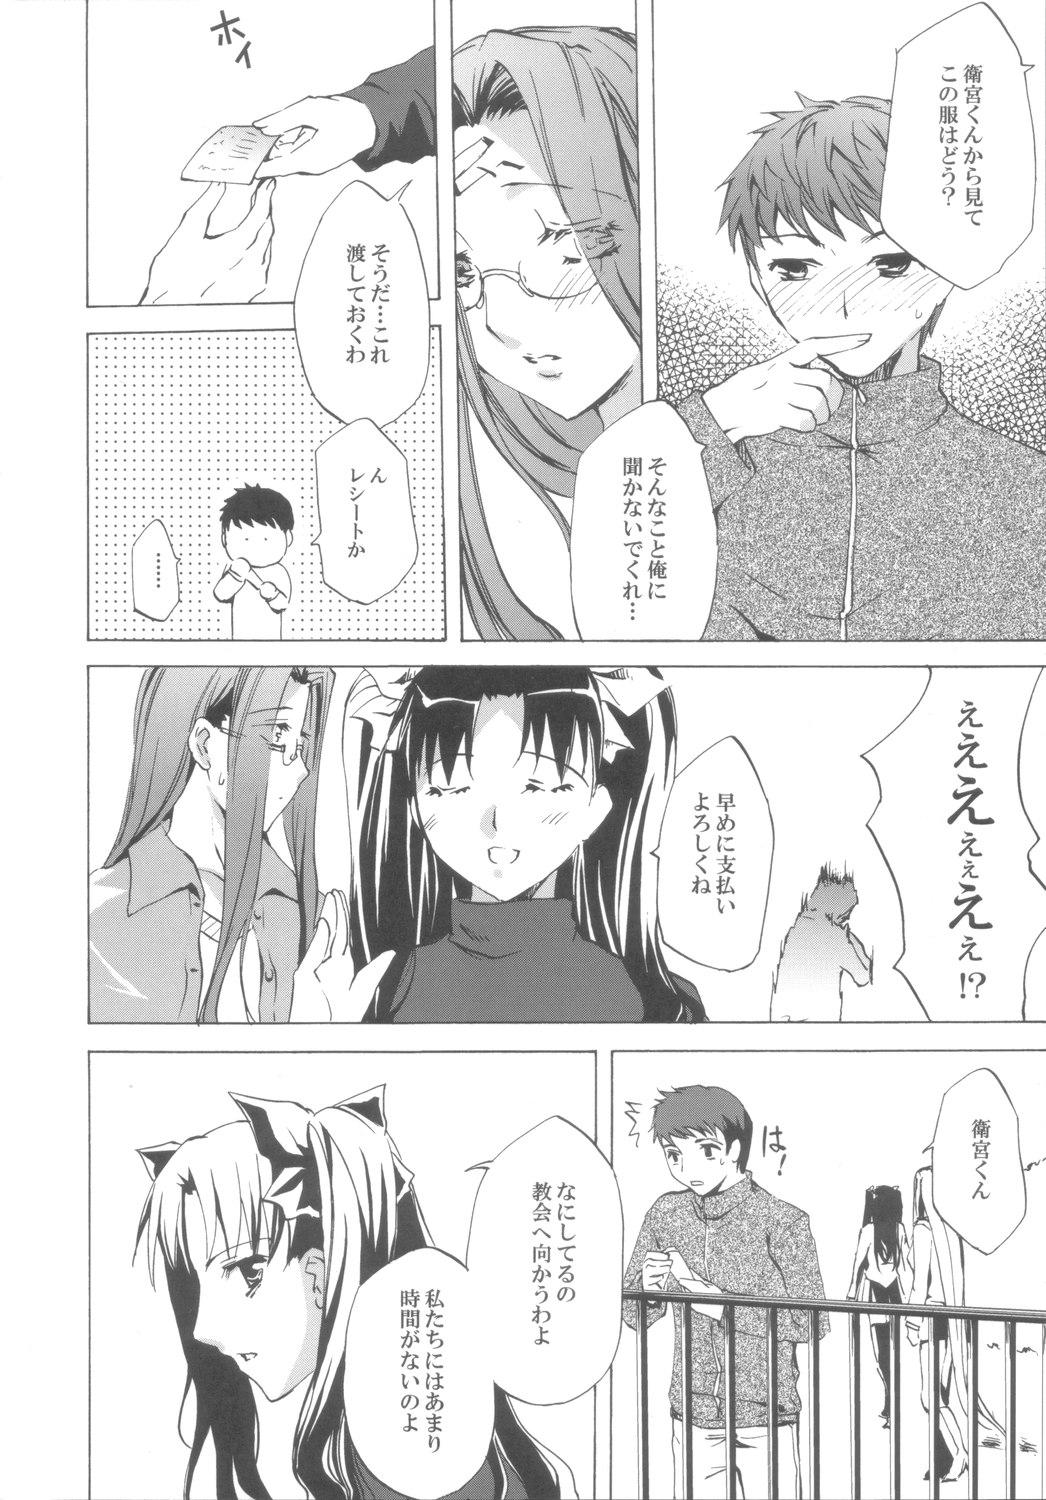 Blowjobs Face III stay memory so truth - Fate stay night Best Blowjob - Page 9